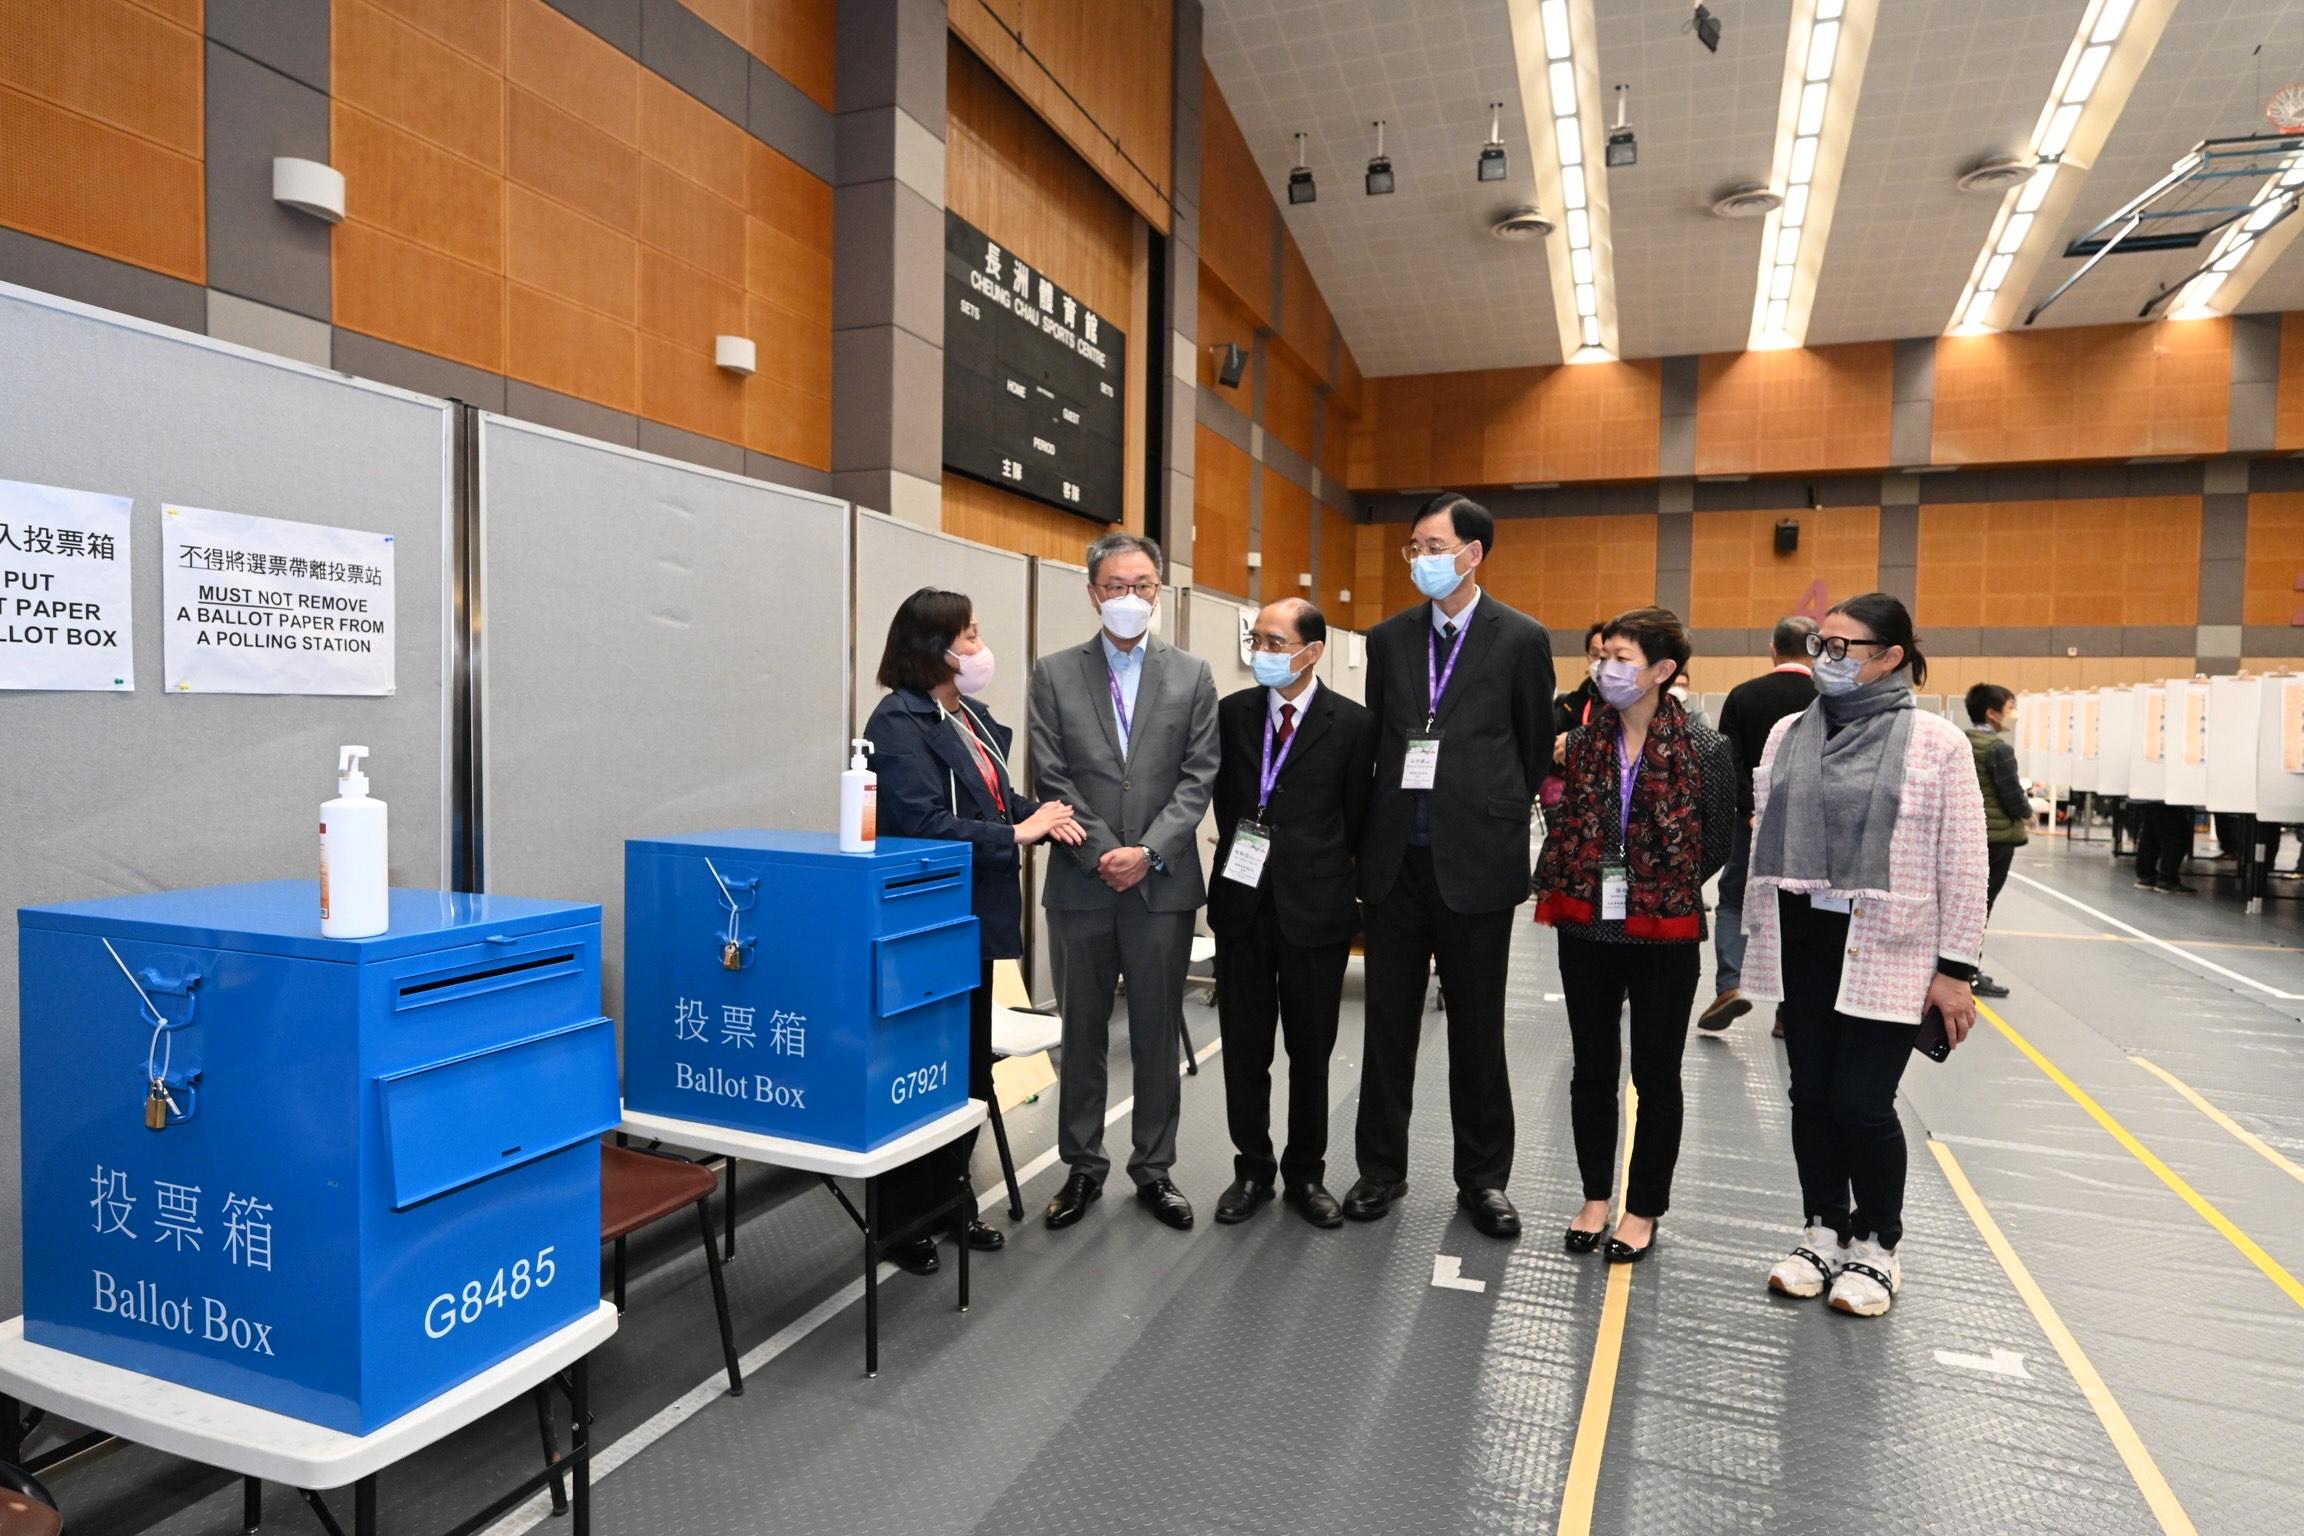 The Chairman of the Electoral Affairs Commission (EAC), Mr Justice David Lok (second left), EAC members Mr Arthur Luk, SC (third left), and Professor Daniel Shek (third right) today (January 15) visited the polling station of the Kaifong Representative Election in the 2023 Rural Ordinary Election at Cheung Chau Sports Centre to inspect the operation of the polling station. Also present were Deputy Director of Home Affairs Ms Eureka Cheung (second right) and the District Officer (Islands), Miss Amy Yeung (first right).